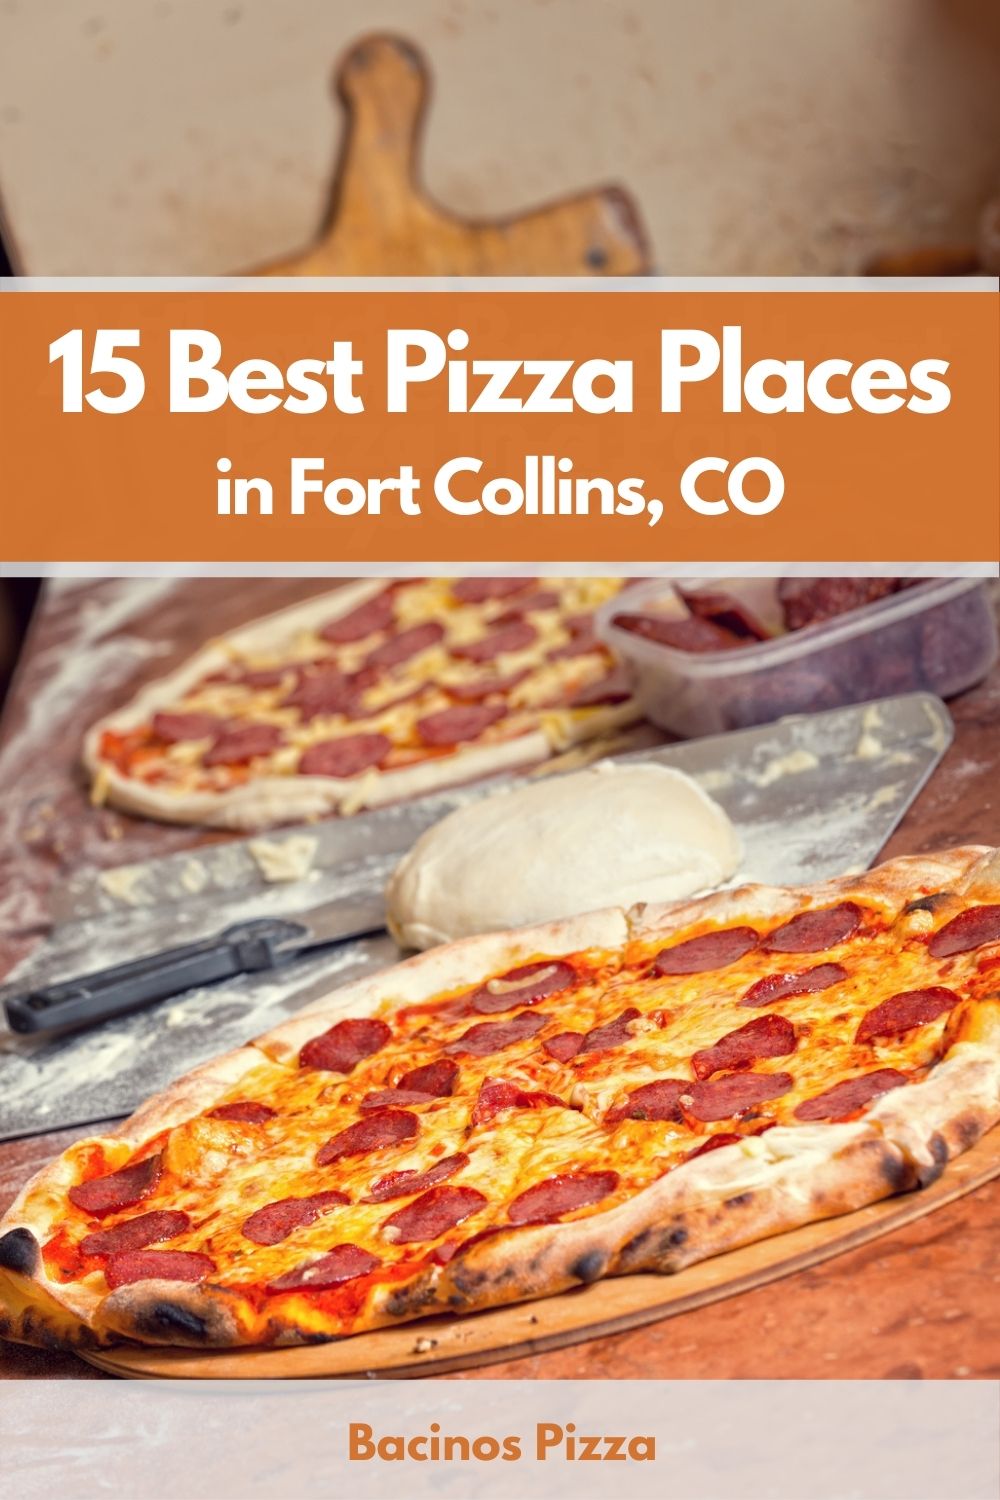 15 Best Pizza Places in Fort Collins, CO pin 2